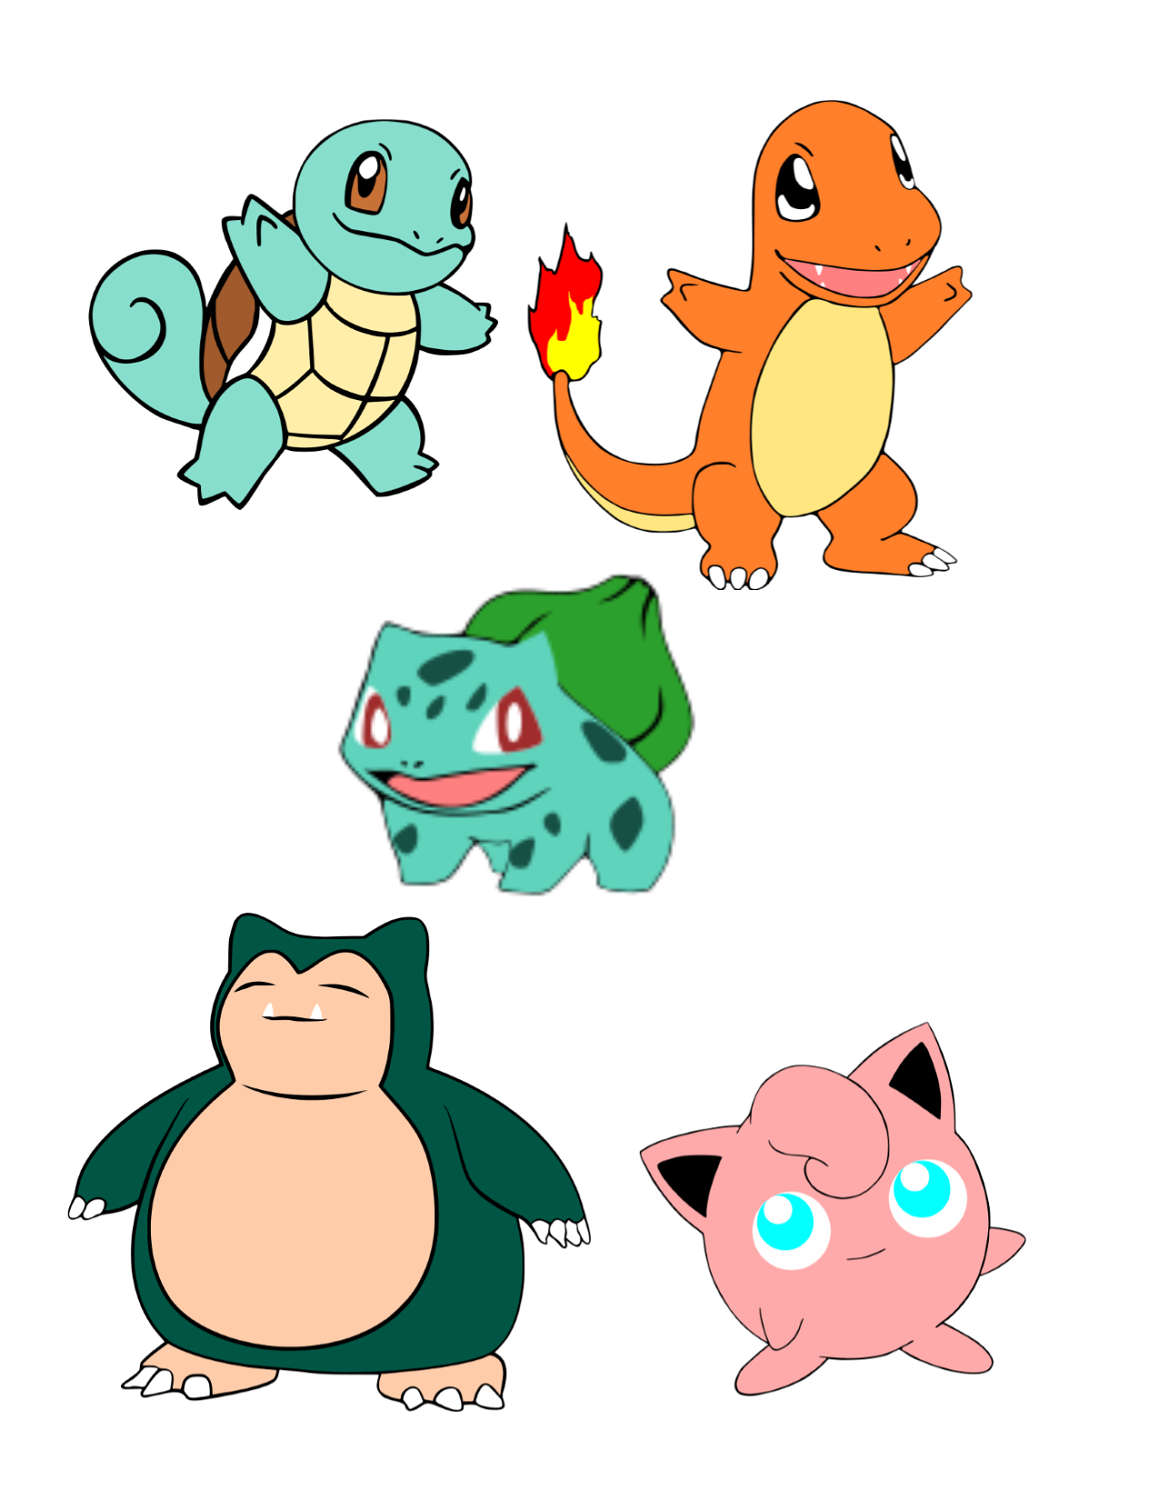 Download Pokemon SVG File-Squirlte, Charmander, Bulbasaur, Snorlax, Jiggly Puff, Meowth, Rattata from ...